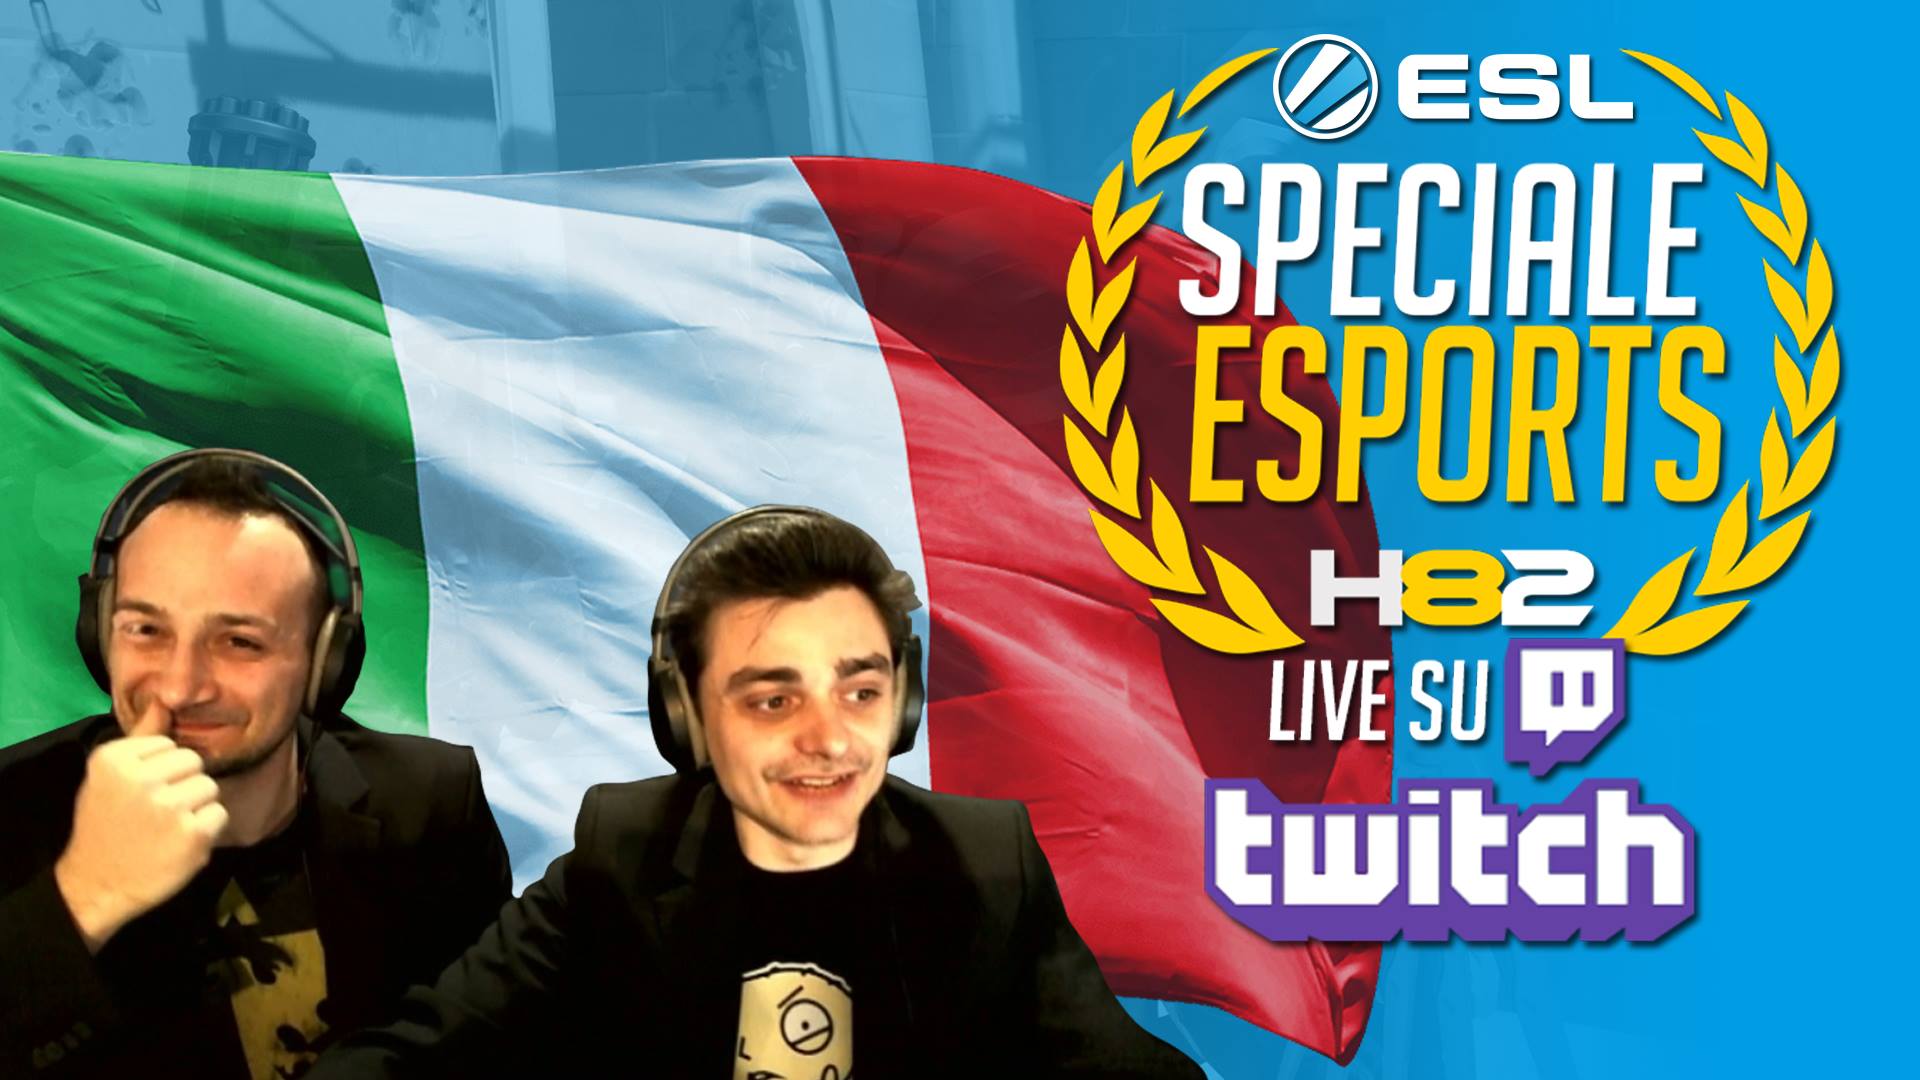 H82 Overwatch Speciale Esports – ESL Community Cup #11 IN VETTA ALL’EUROPA!